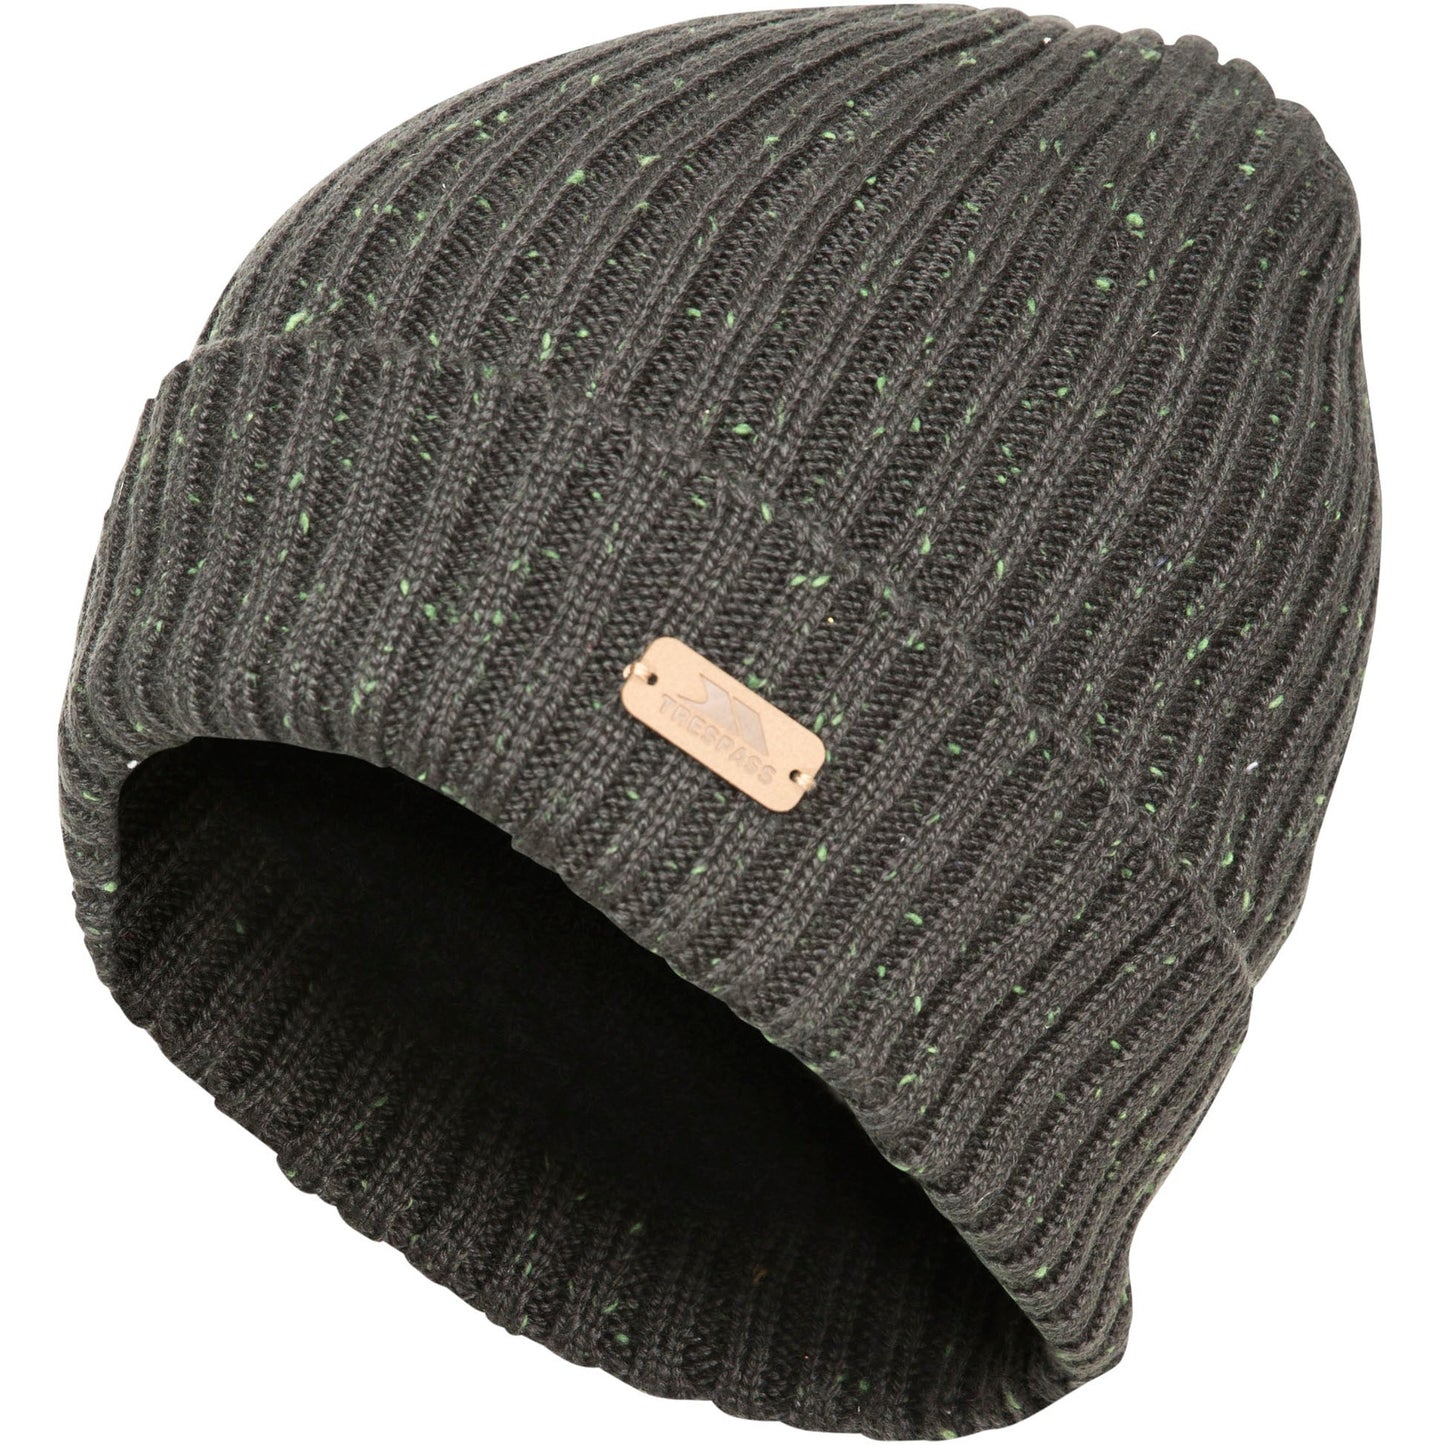 Mateo Lined Knitted Beanie Hat - Olive Fleck